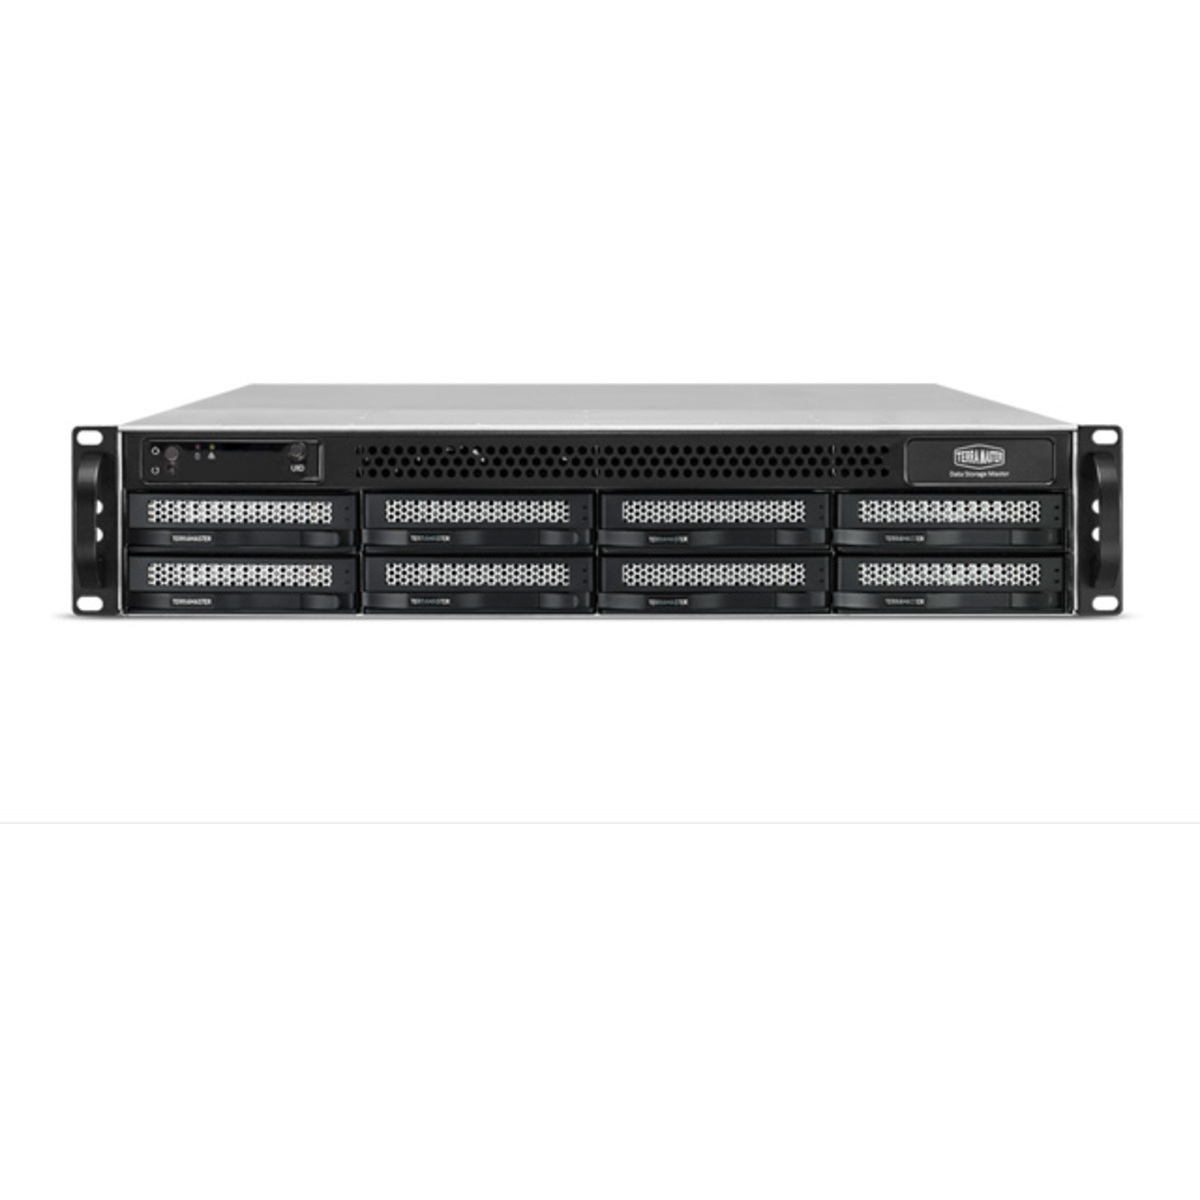 TerraMaster U8-423 16tb 8-Bay RackMount Multimedia / Power User / Business NAS - Network Attached Storage Device 8x2tb Western Digital Red Plus WD20EFZX 3.5 5400rpm SATA 6Gb/s HDD NAS Class Drives Installed - Burn-In Tested - FREE RAM UPGRADE U8-423